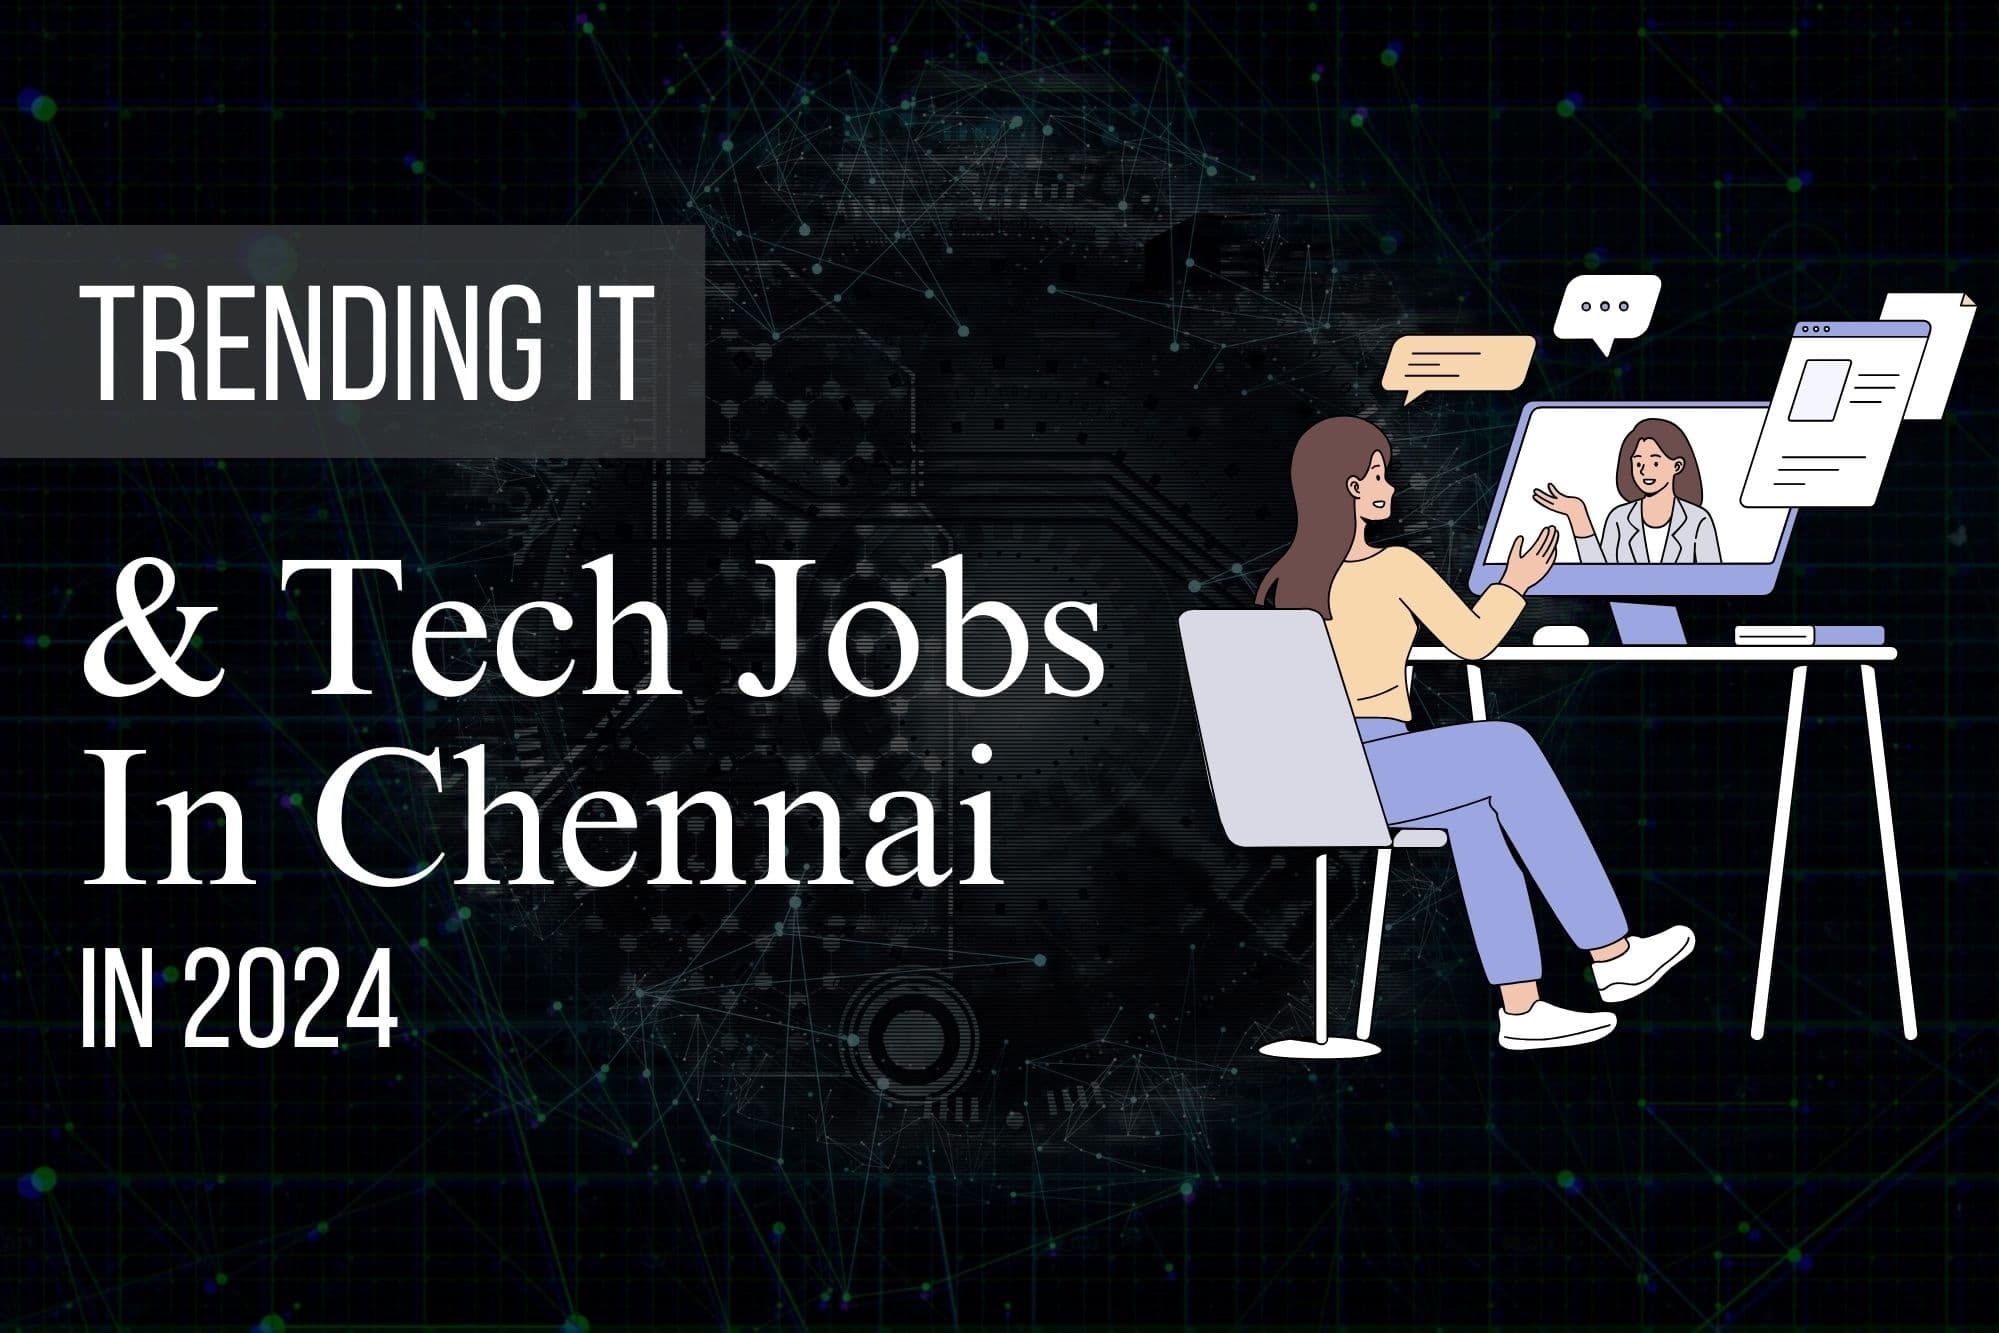 IT and tech jobs in Chennai